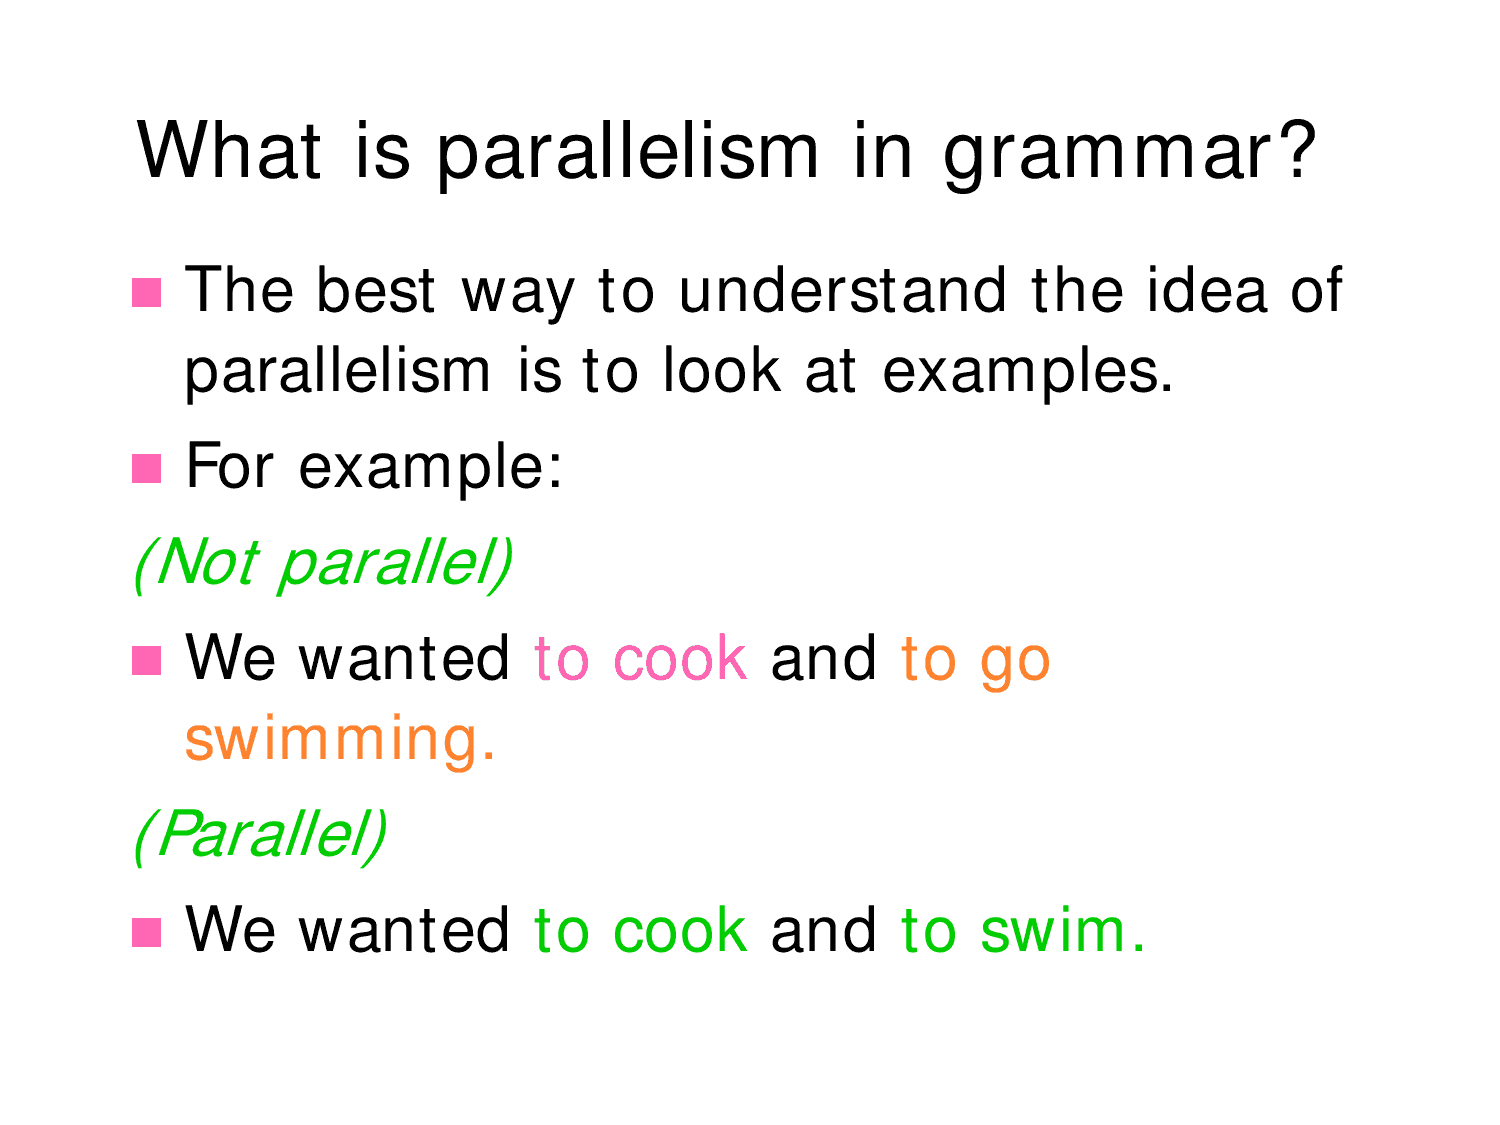 what is parallelism in grammar